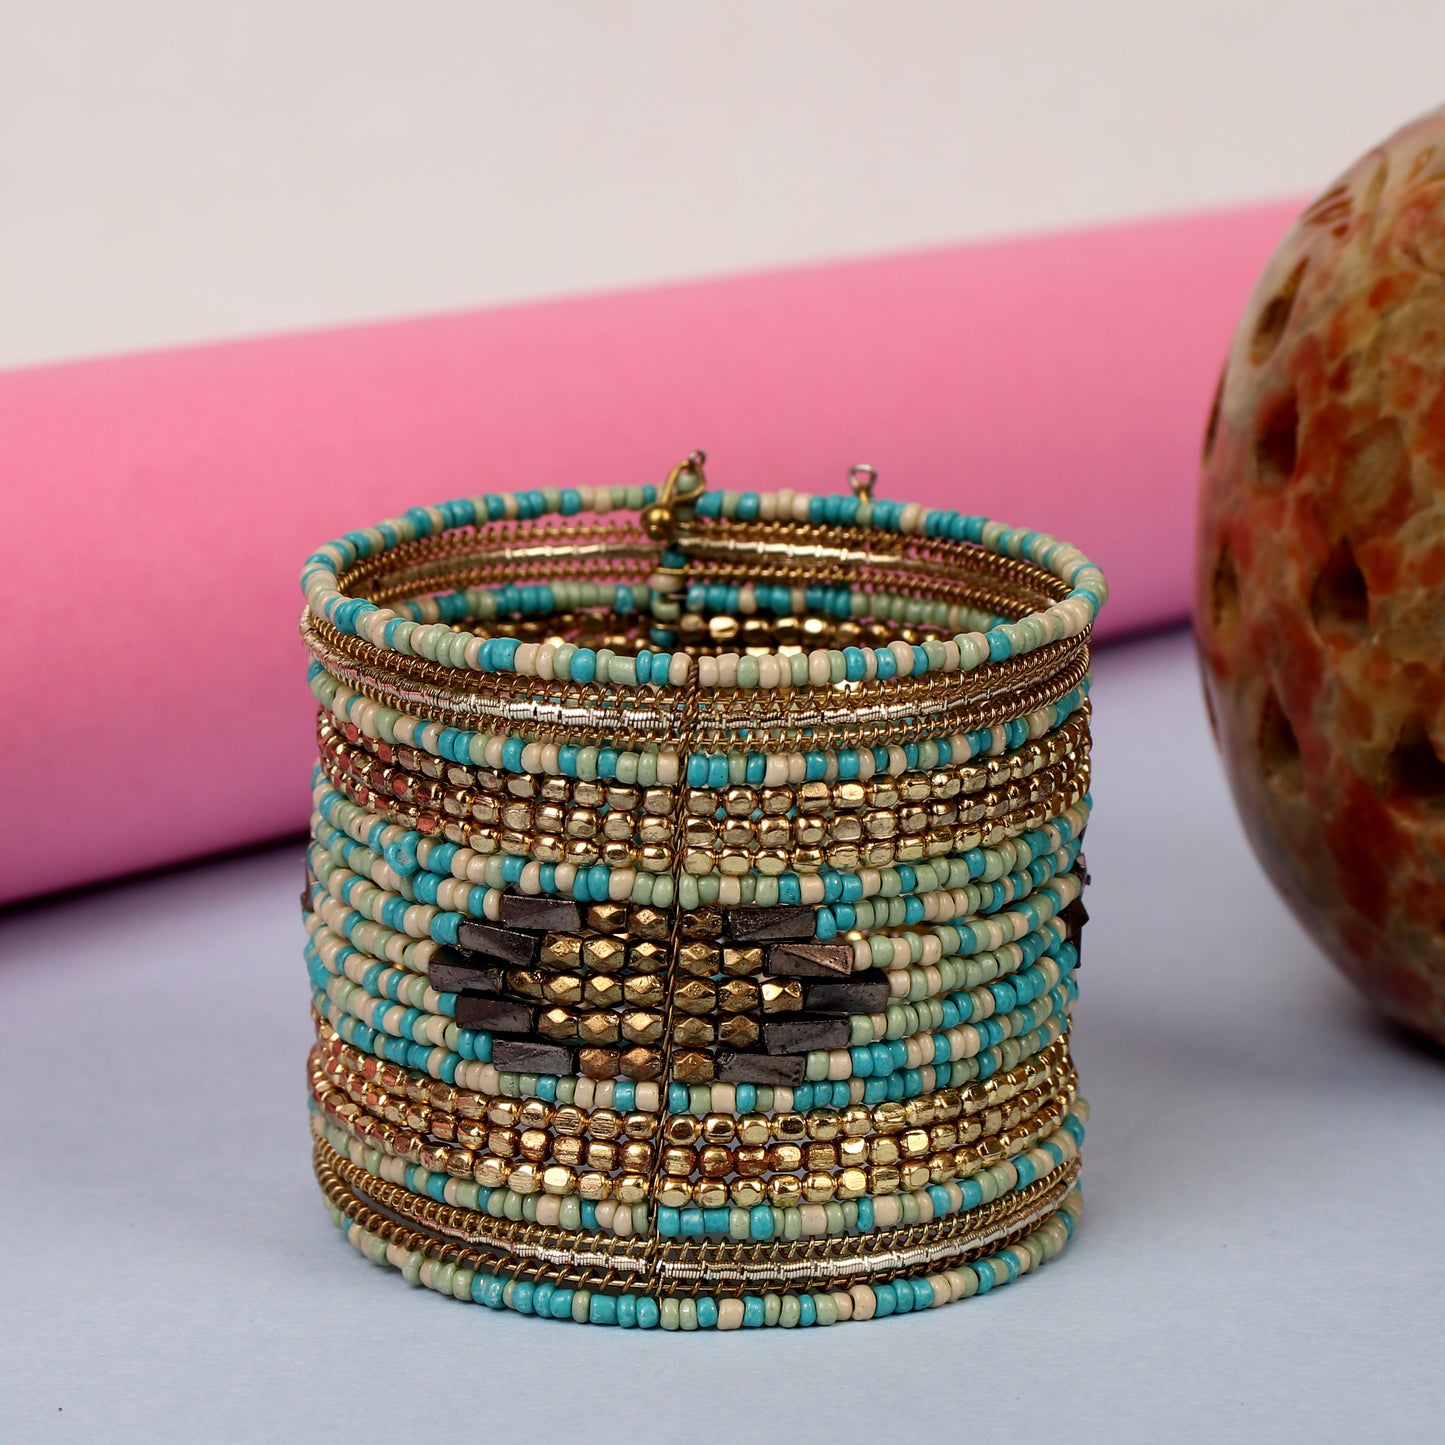 The Vivid Glowing Bangle in Shades of Green